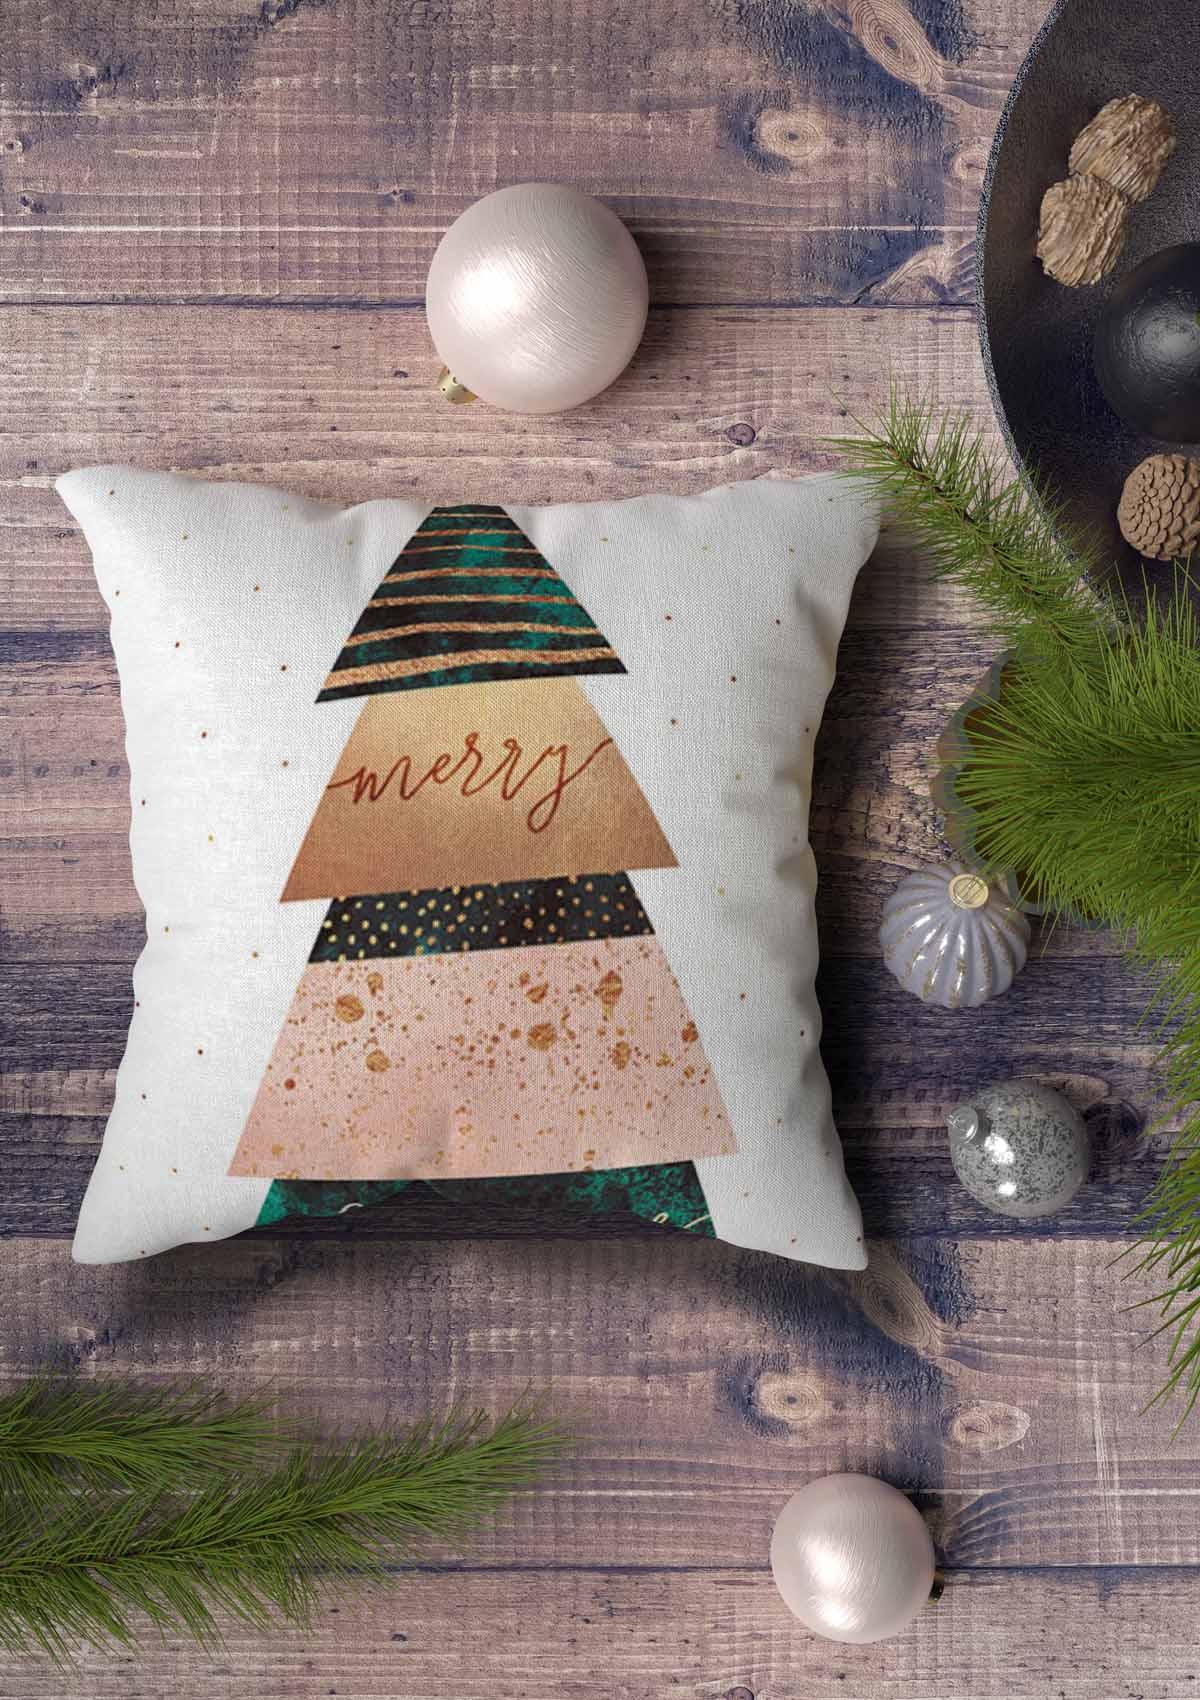 Christmas Tree Cushion Cover - Festive cushion cover featuring a Christmas tree design, perfect for holiday home decor. Adds a touch of whimsical charm to any space.